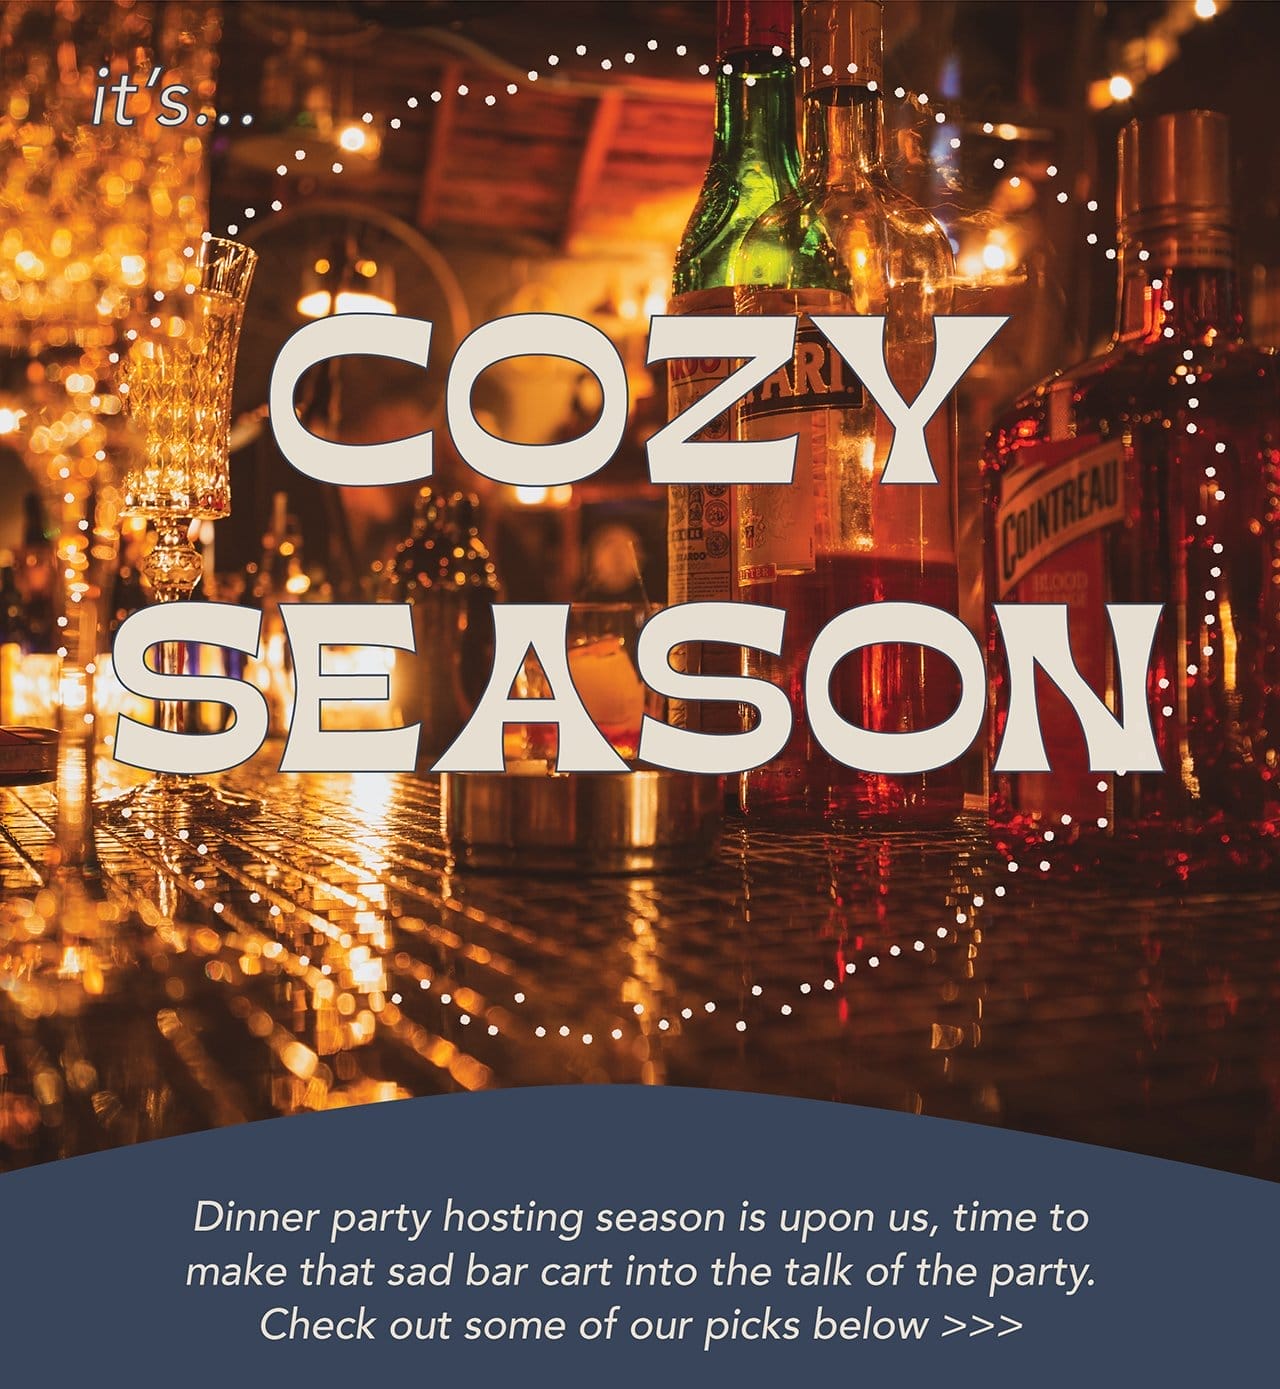 "Cozy Season" with picture of warmly lit bar